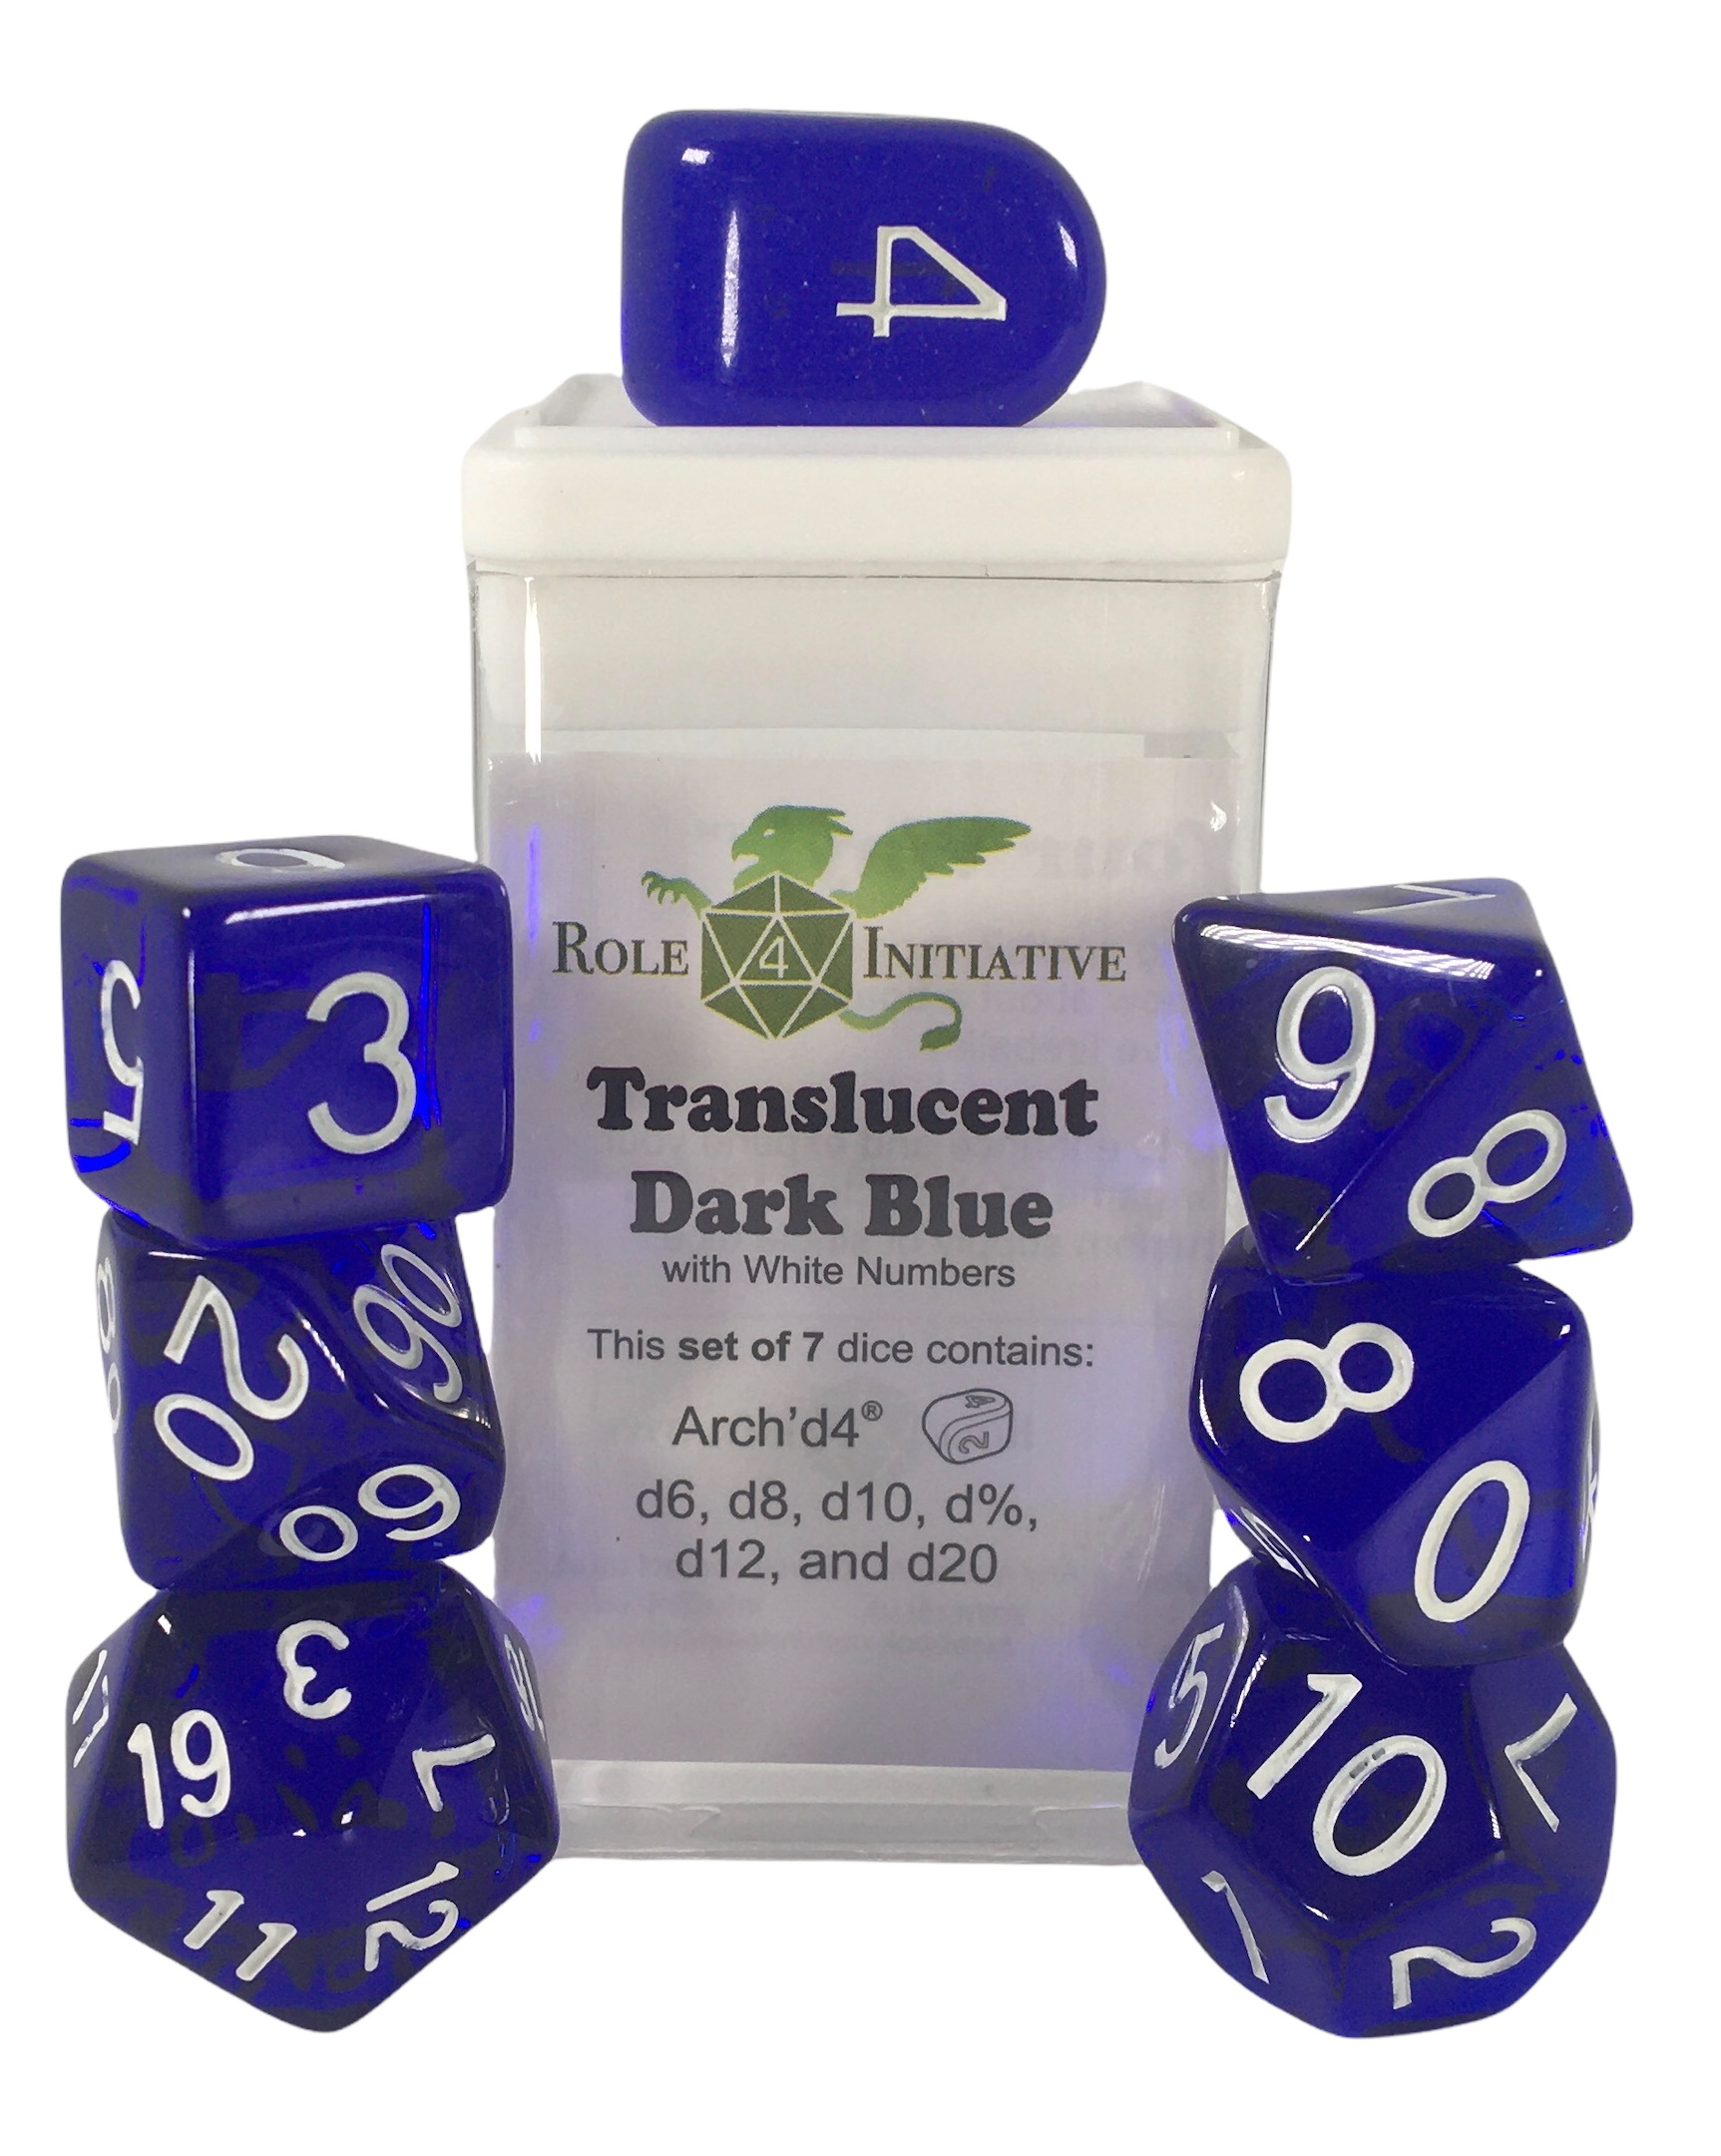 Role 4 Initiative Polyhedral 7 Dice Set: Translucent Dark Blue with White (Arch D4) 